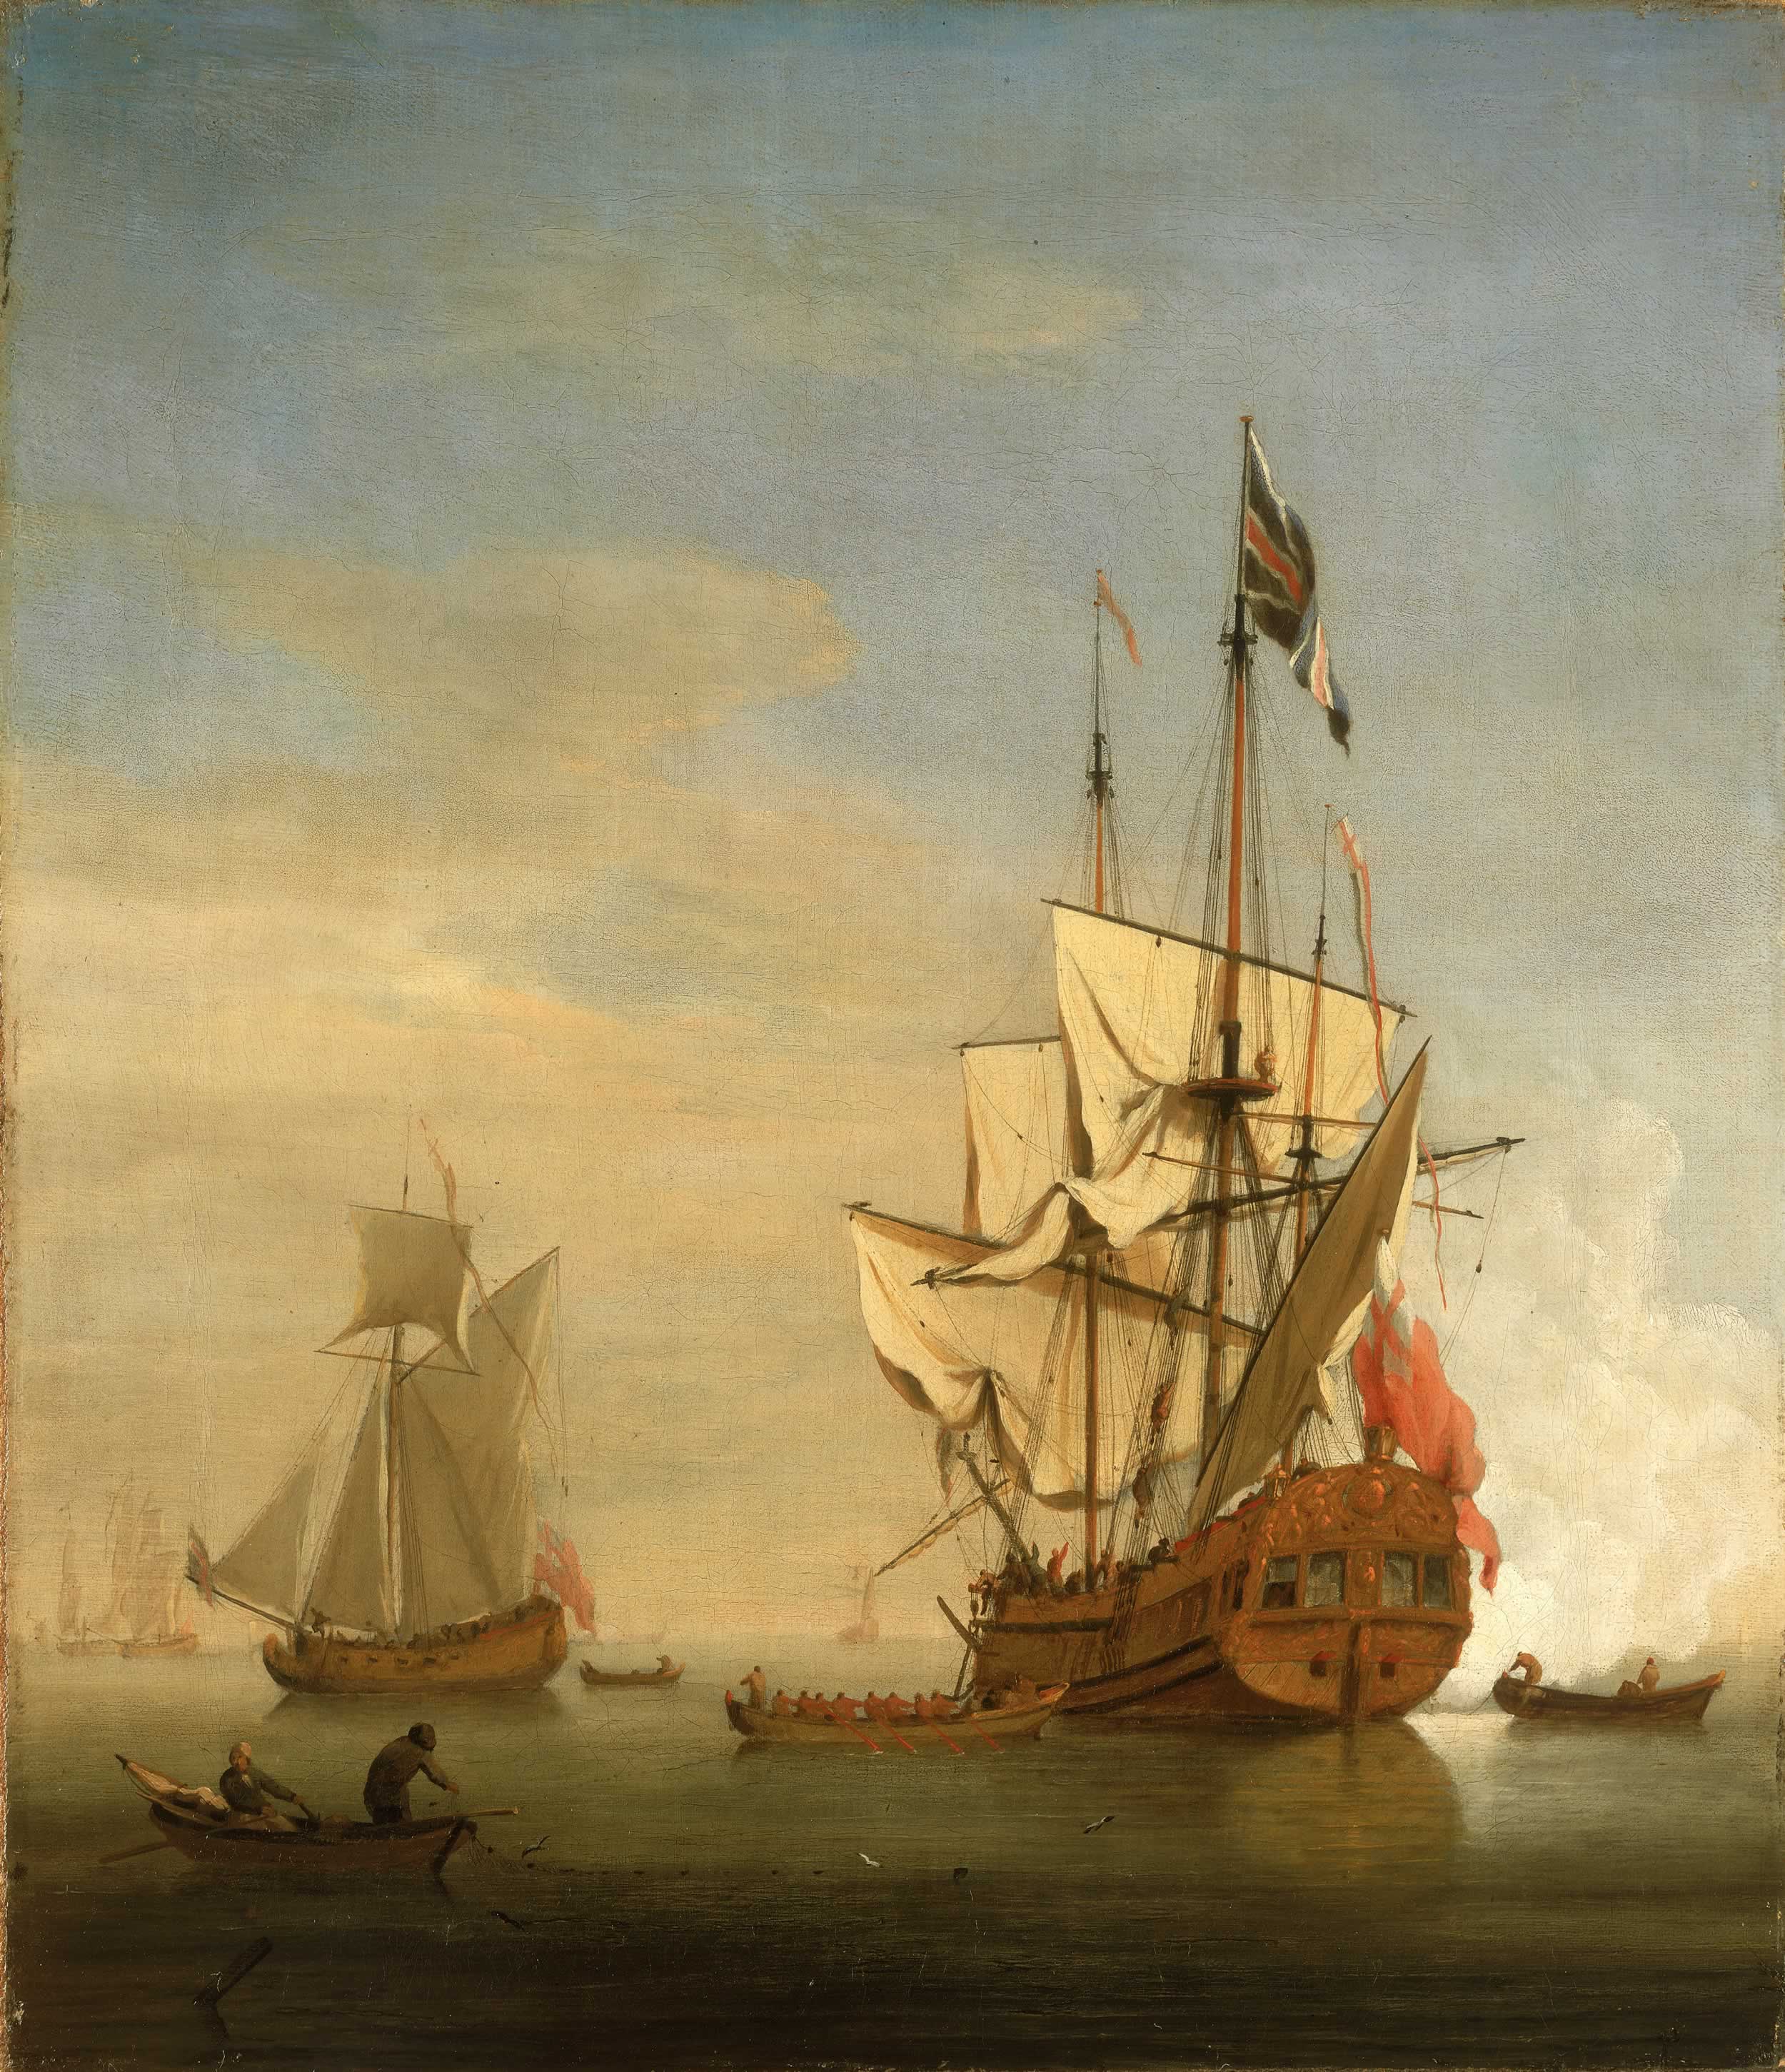 an-english-sixth-rate-ship-firing-a-salute-as-a-barge-leaves-a-royal-yacht-nearby.jpg